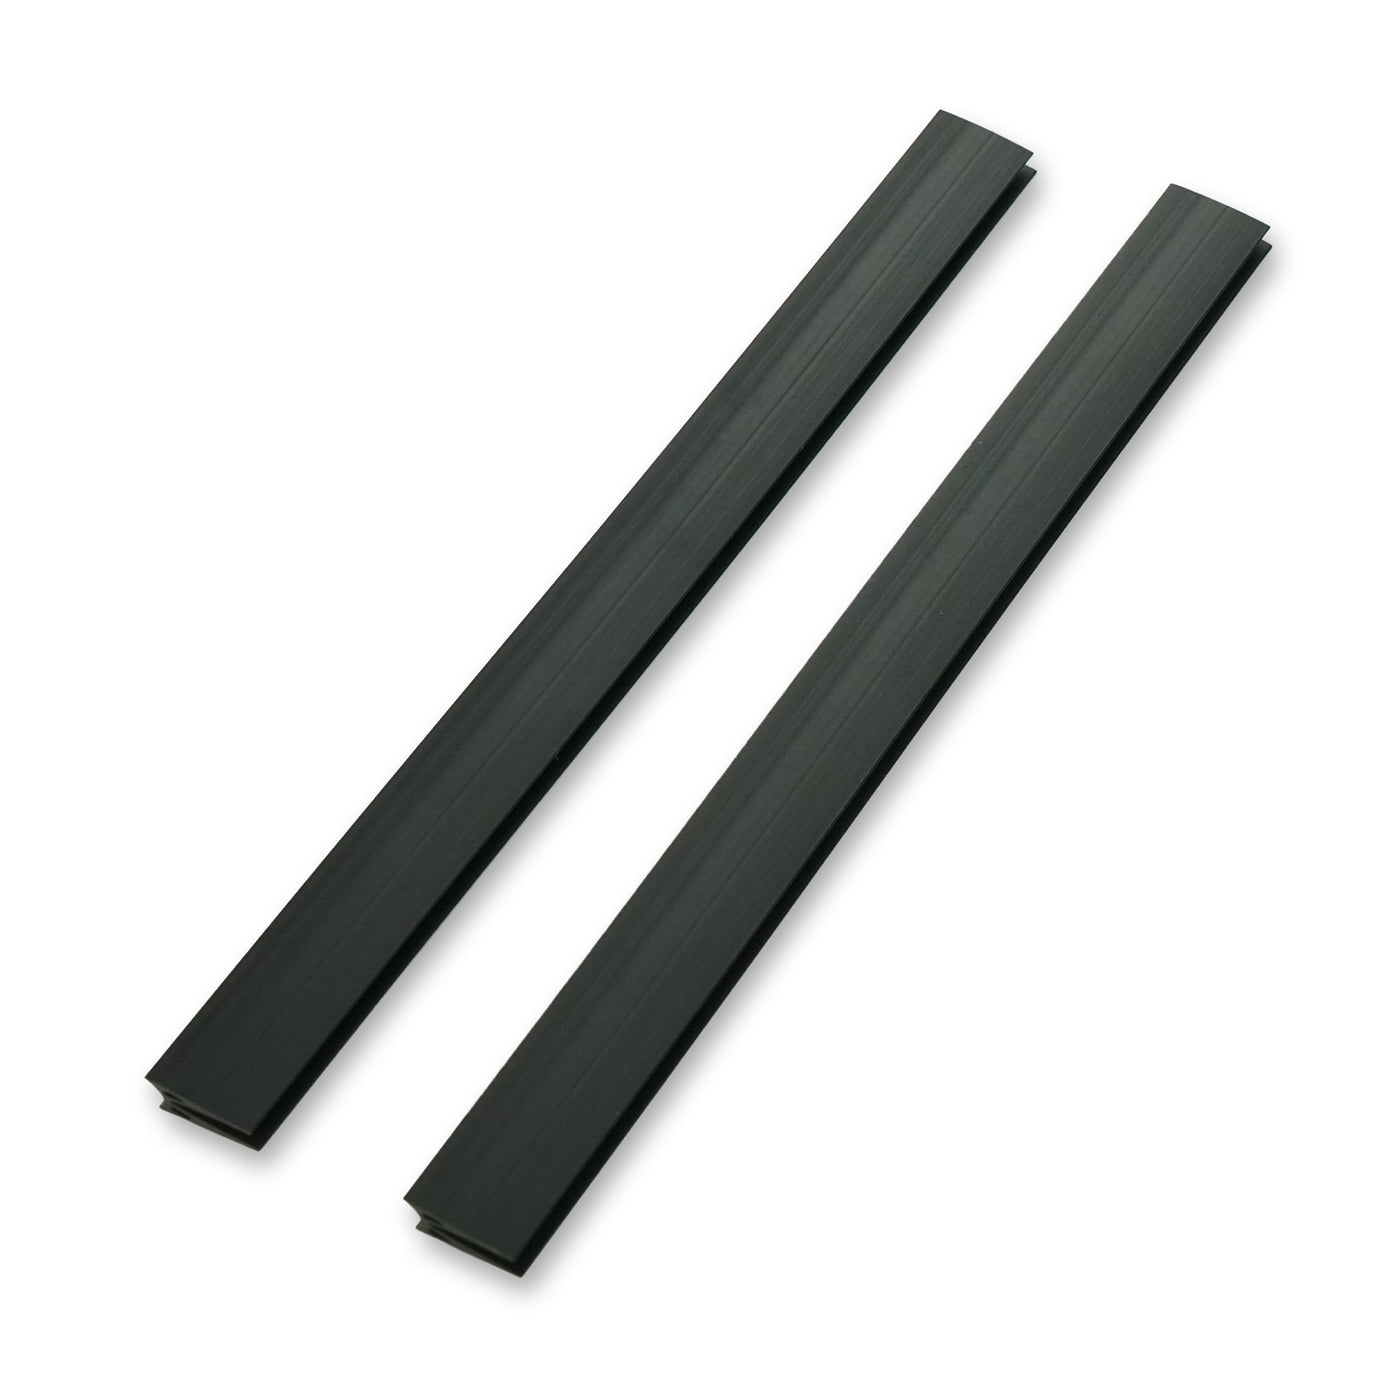 Rubber Mast Cable Guides